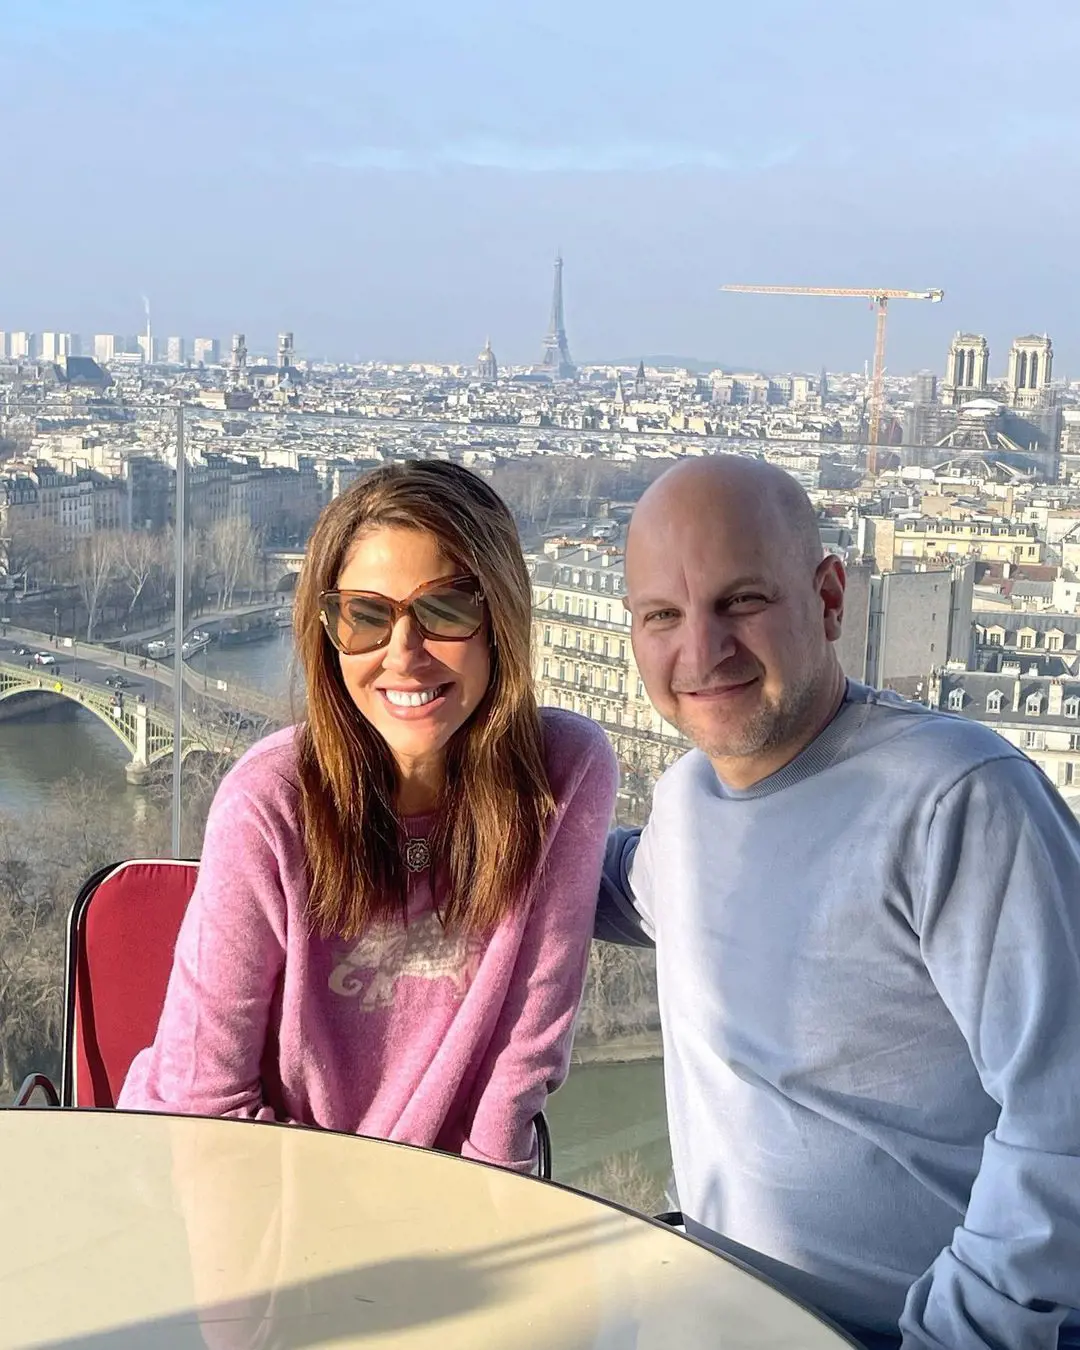 The couple visit to France during their romantic trip